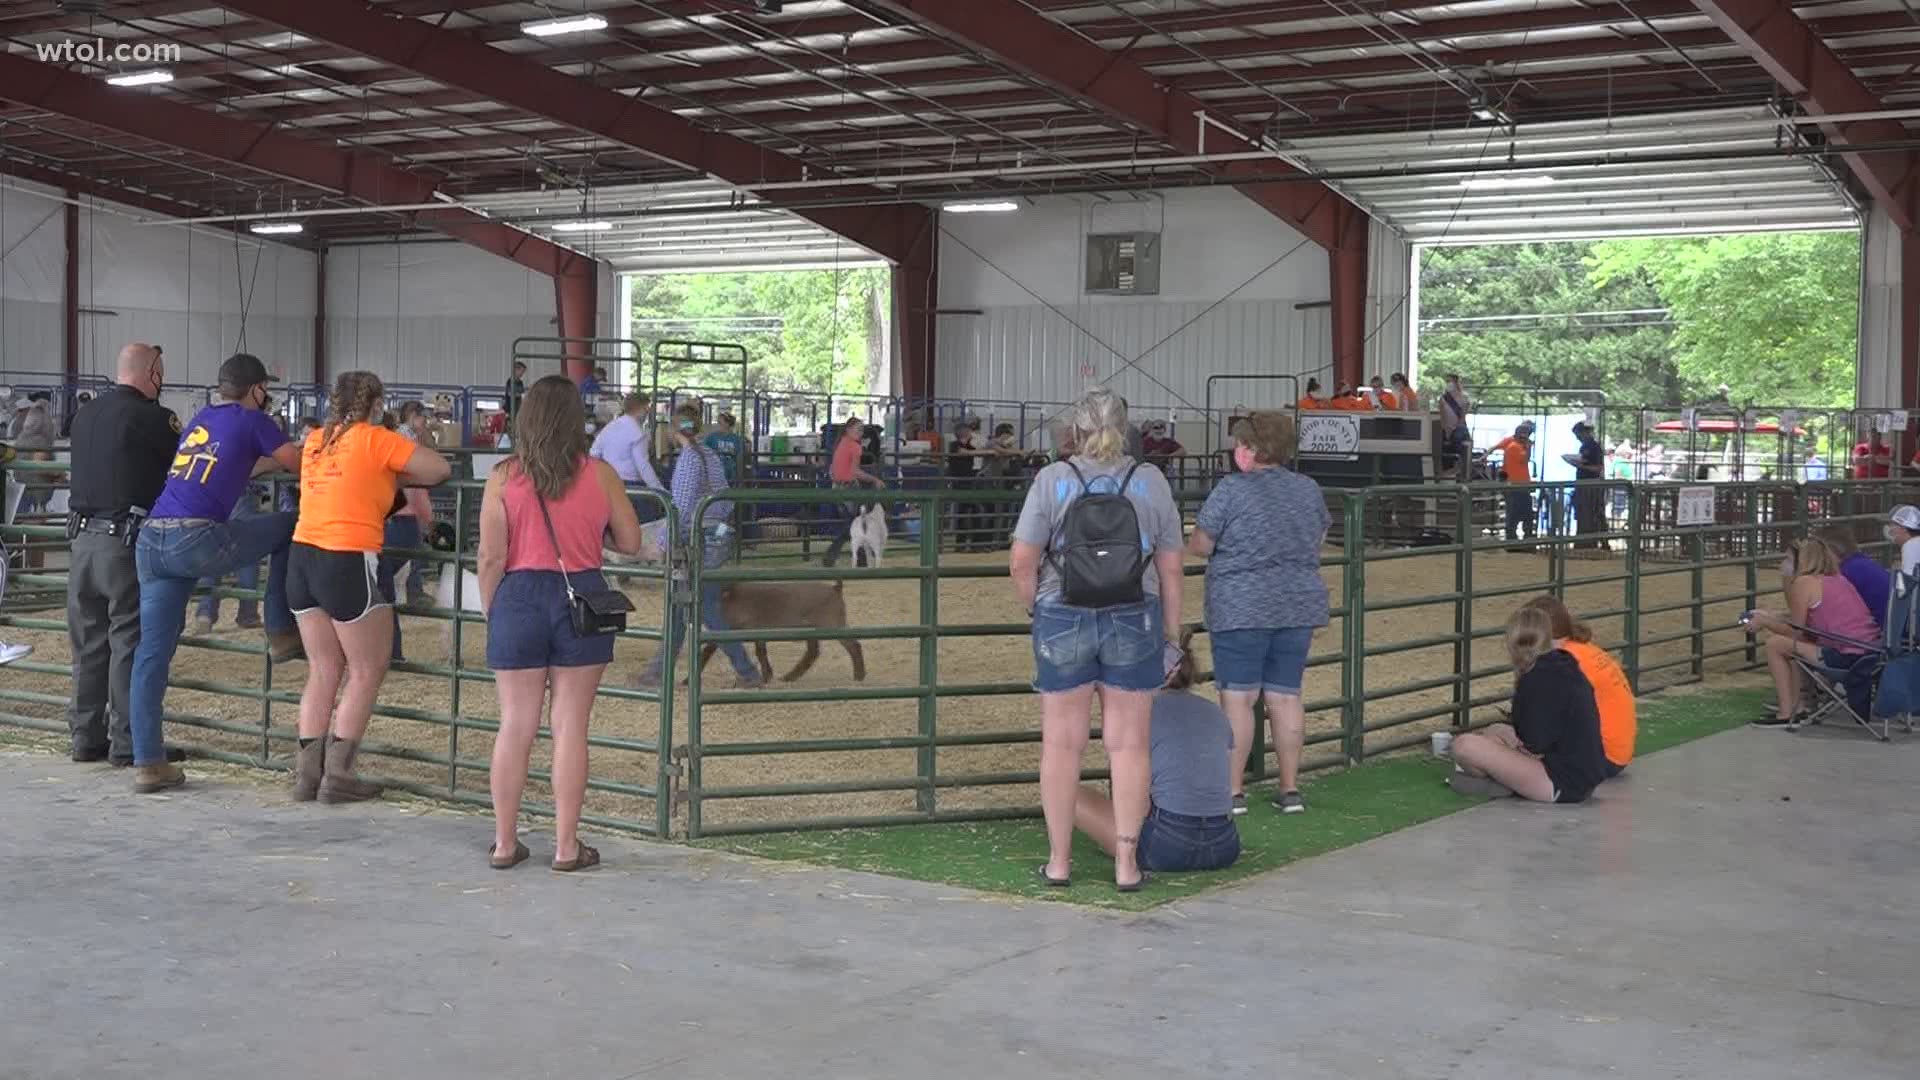 County fairs across Ohio are looking a lot different this summer, and this week tighter restrictions are in place after an announcement from Gov. Mike DeWine.